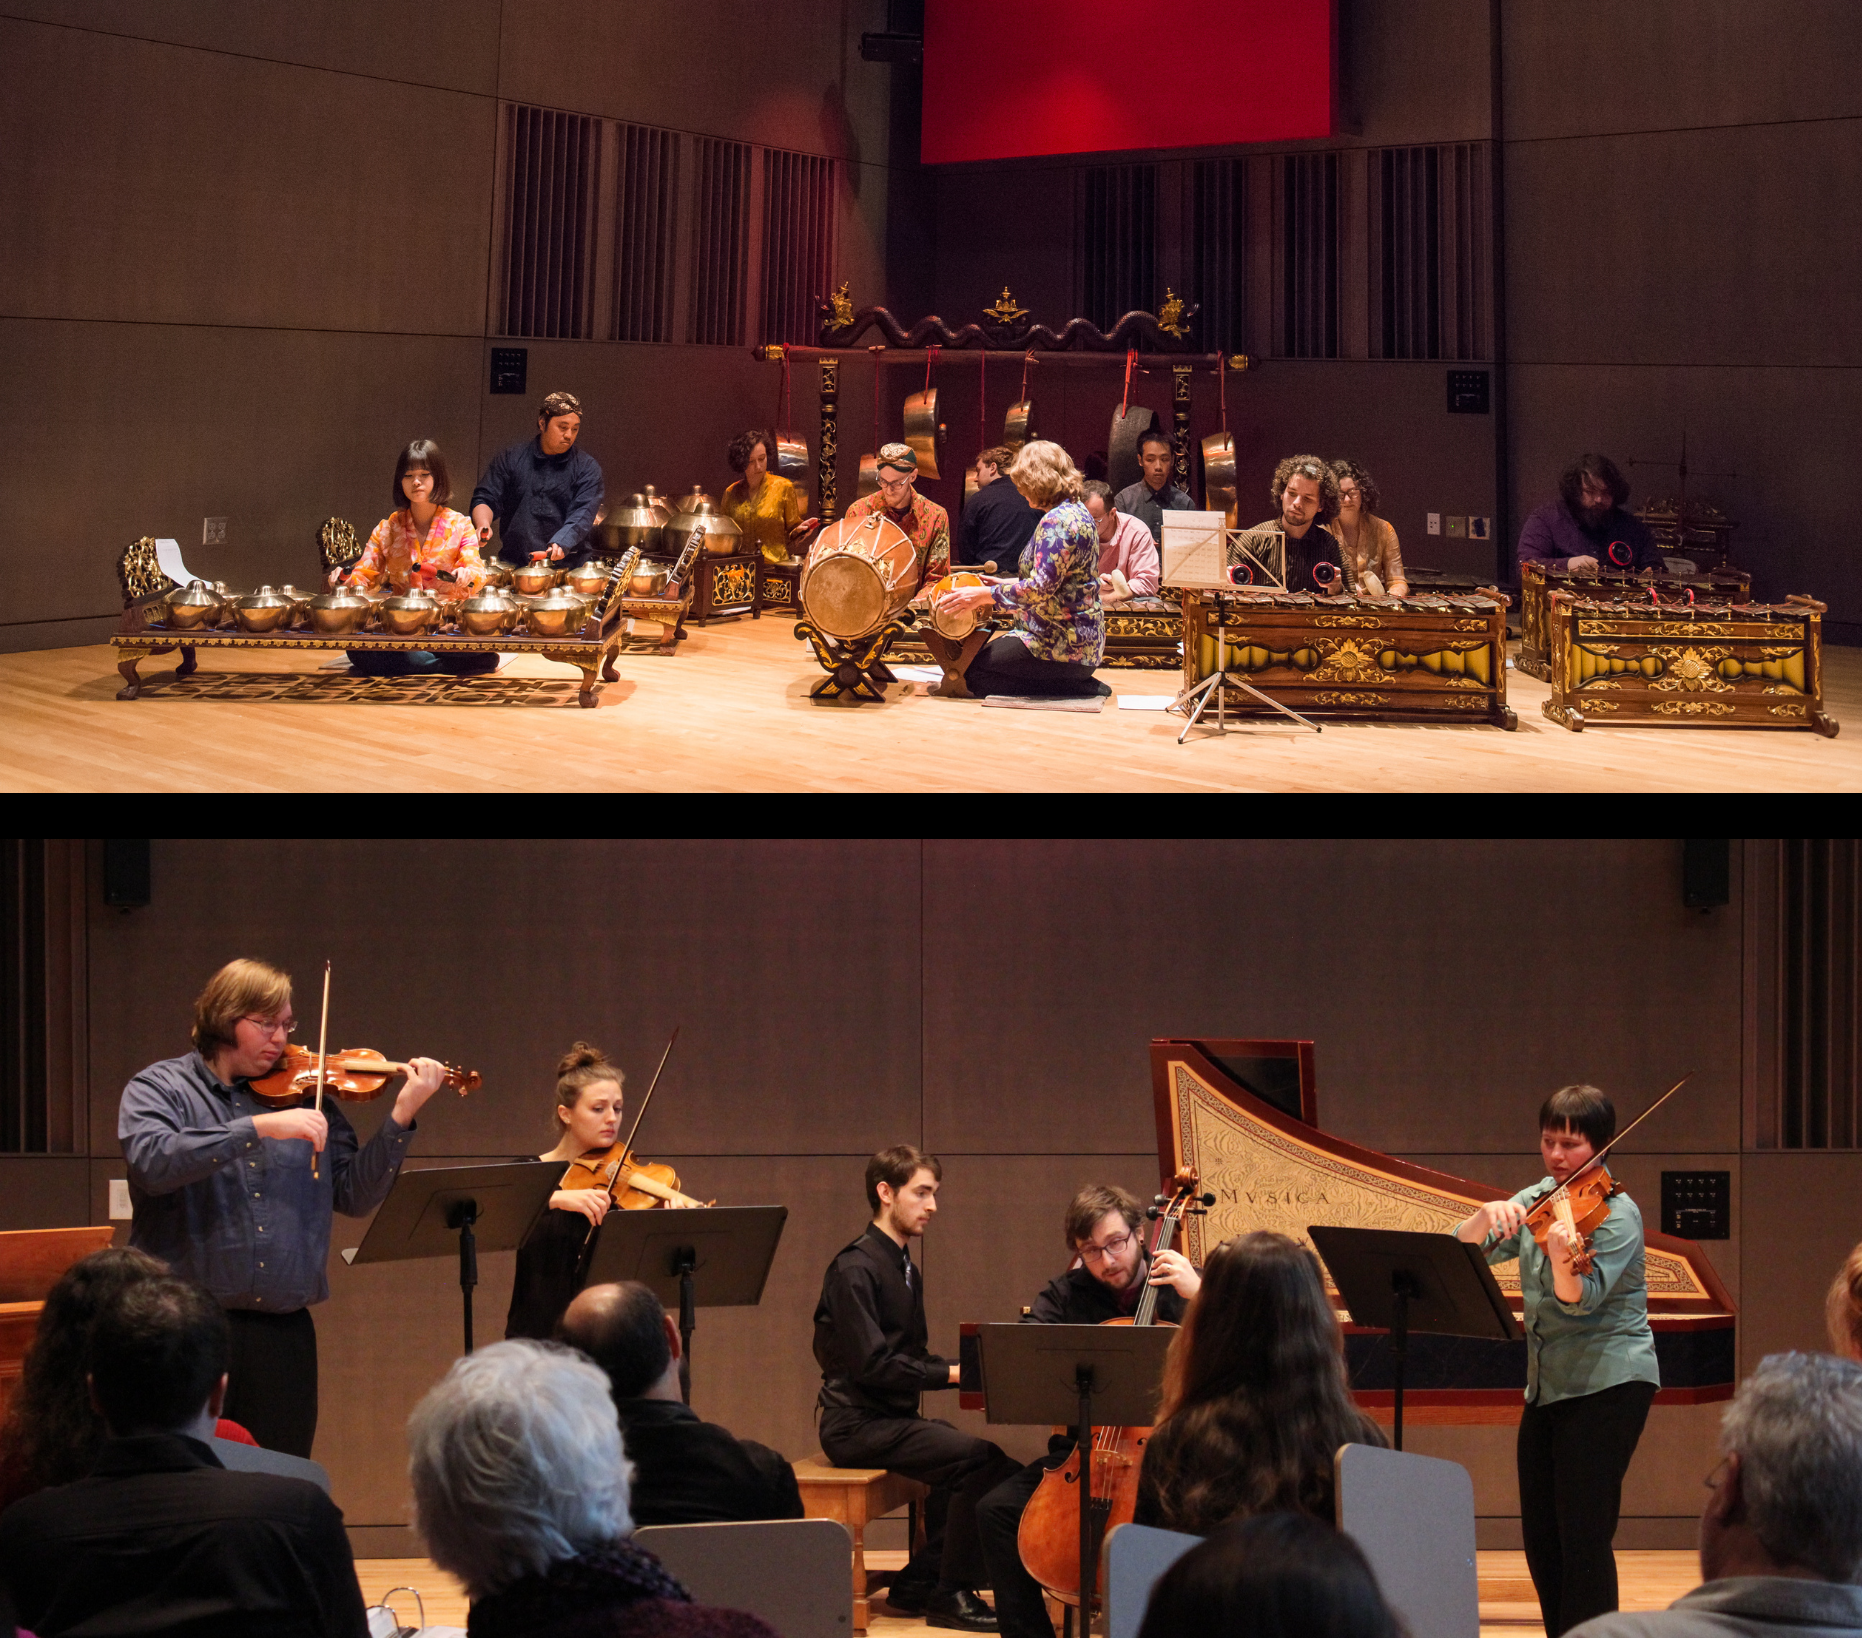 In top and bottom images, musicians perform on instruments